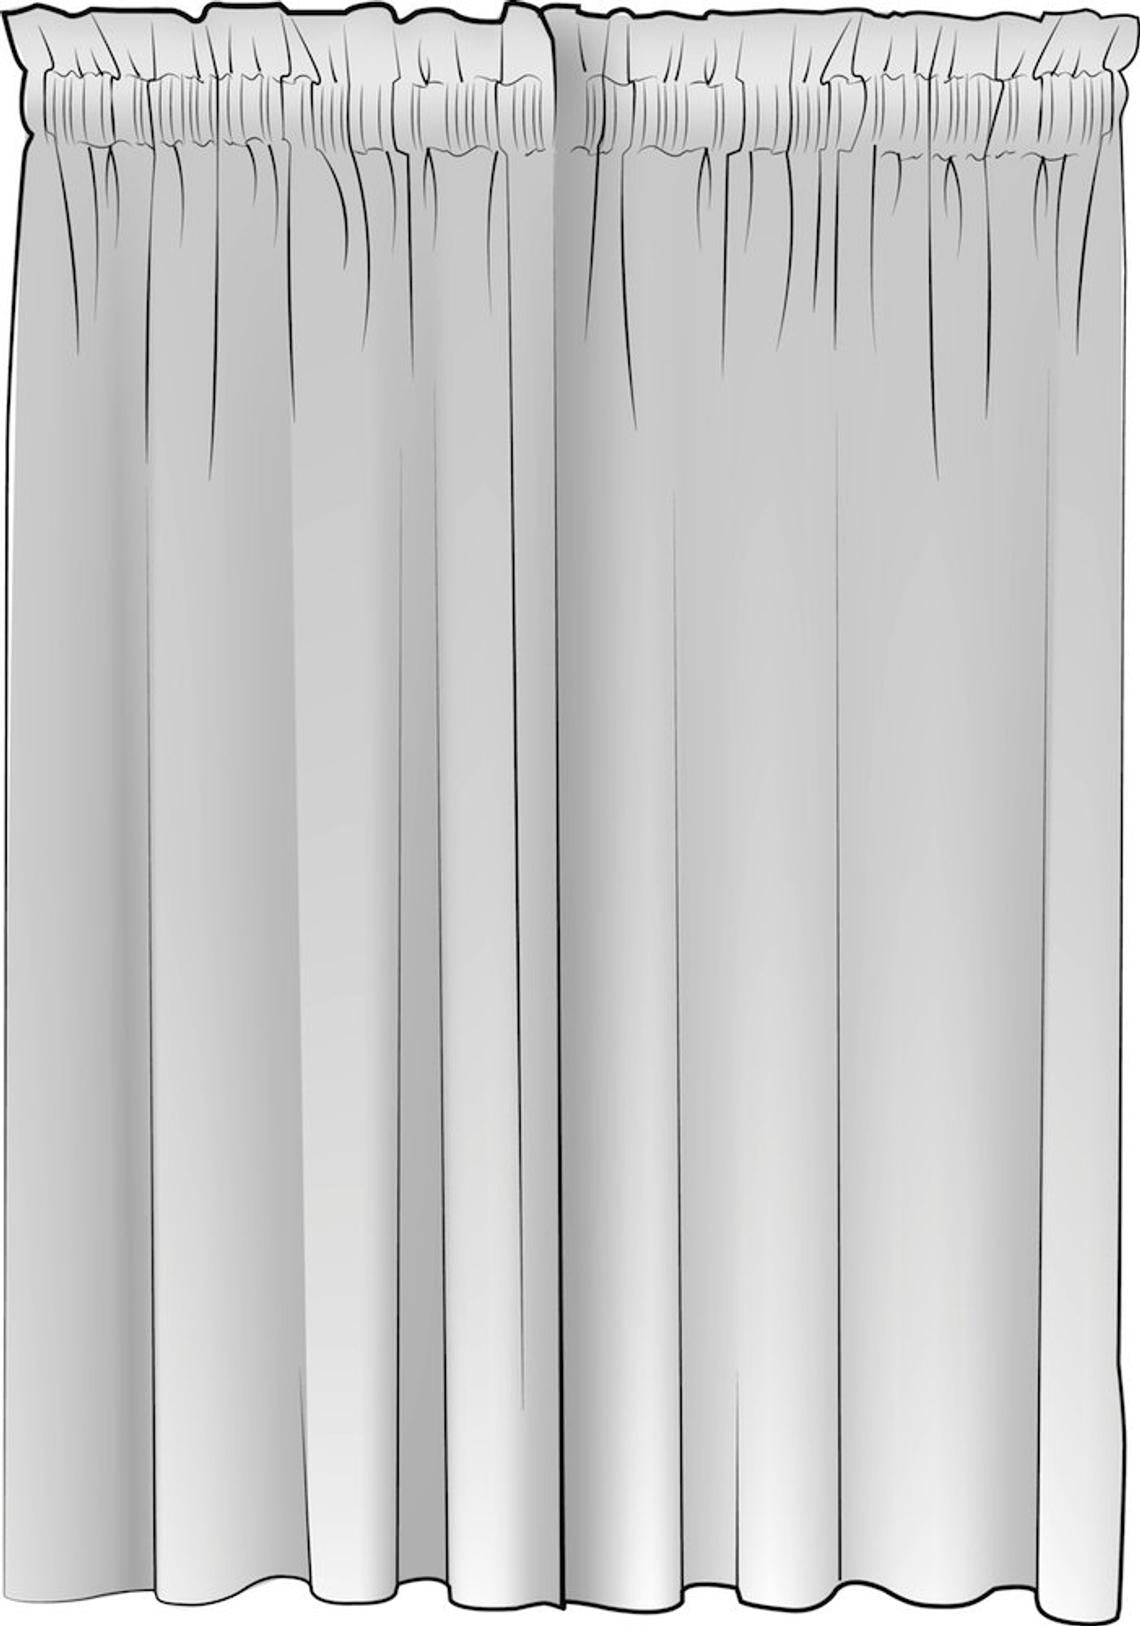 rod pocket curtain panels pair in classic storm gray ticking stripe on white